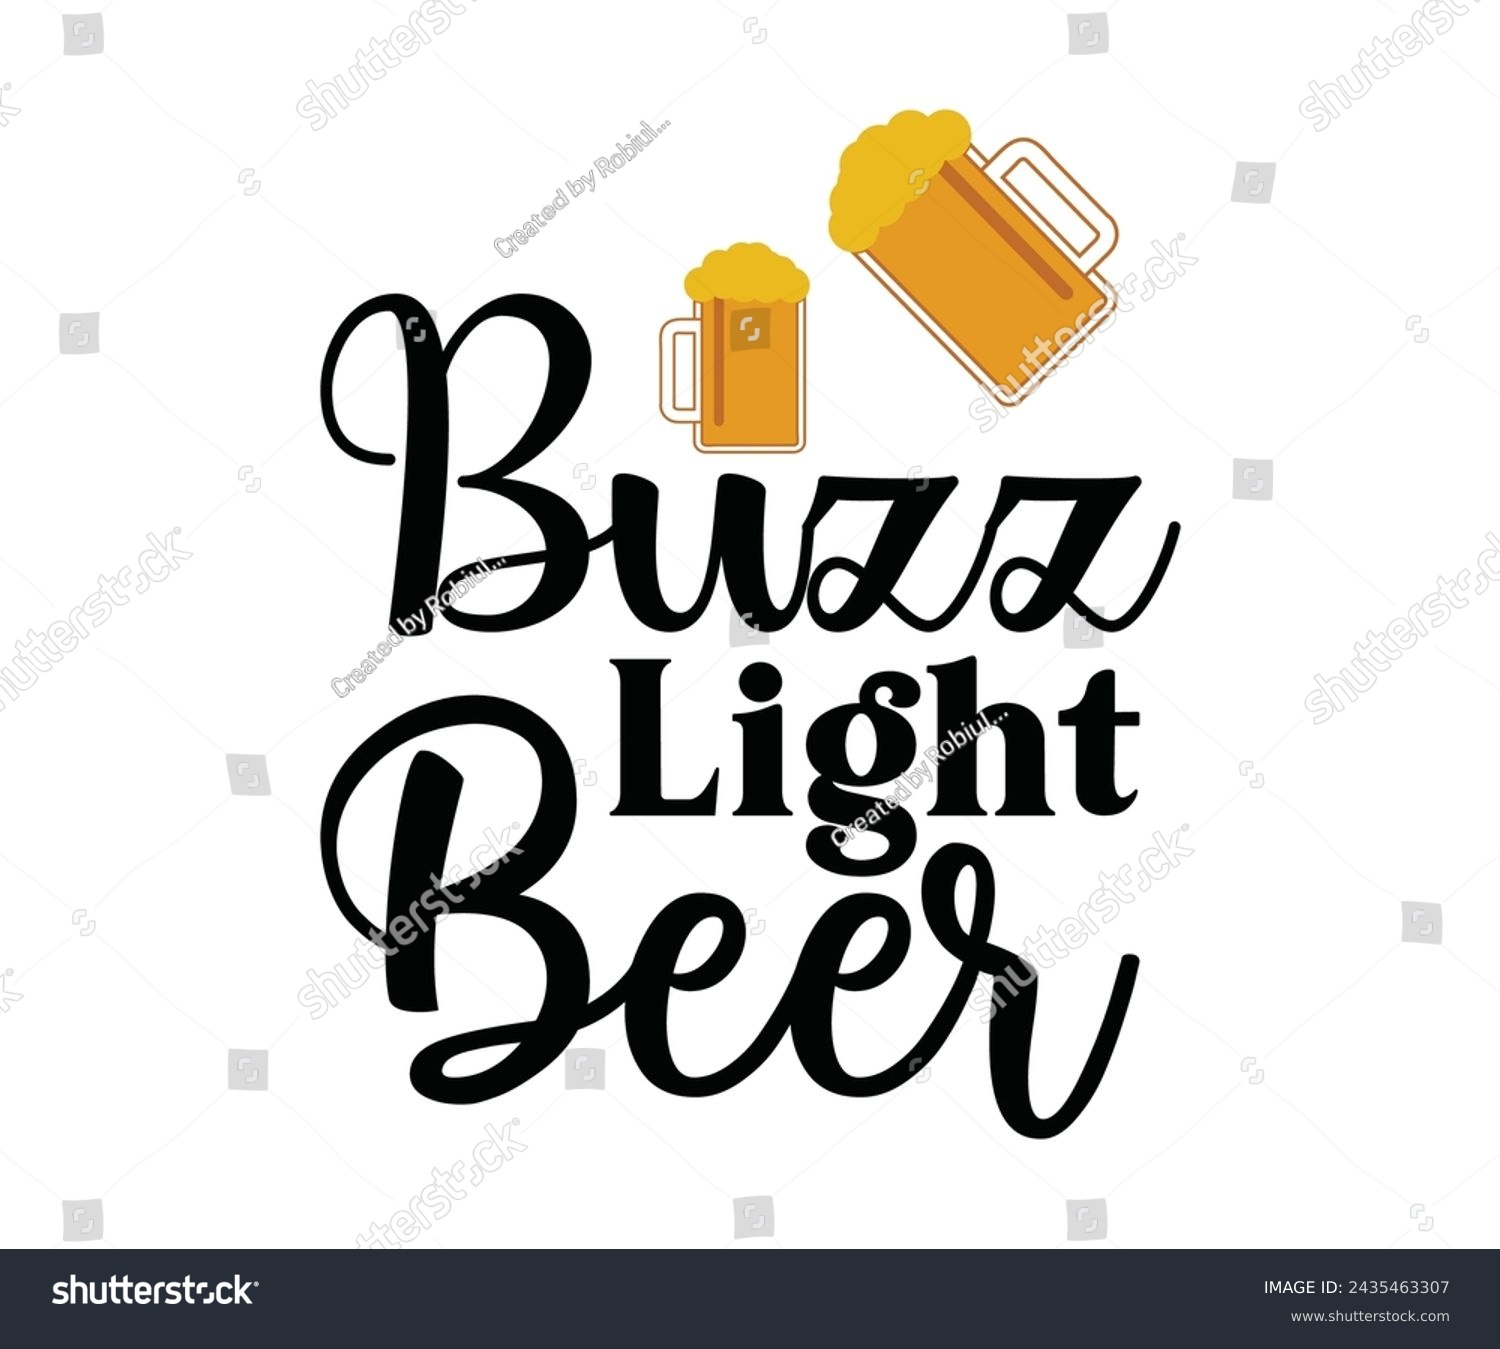 SVG of Beer Svg,Beer Quotes,Beer Lover Gift,Beer Girl Shirt,Craft Beer Lover,Beer Clothin,Beer Retro Shirt,Beer Mug,Funny Beer Lover Mug,Hopeful Beer Shirt,Gifts For Smoker,Cigars Gift,Lover Gift svg